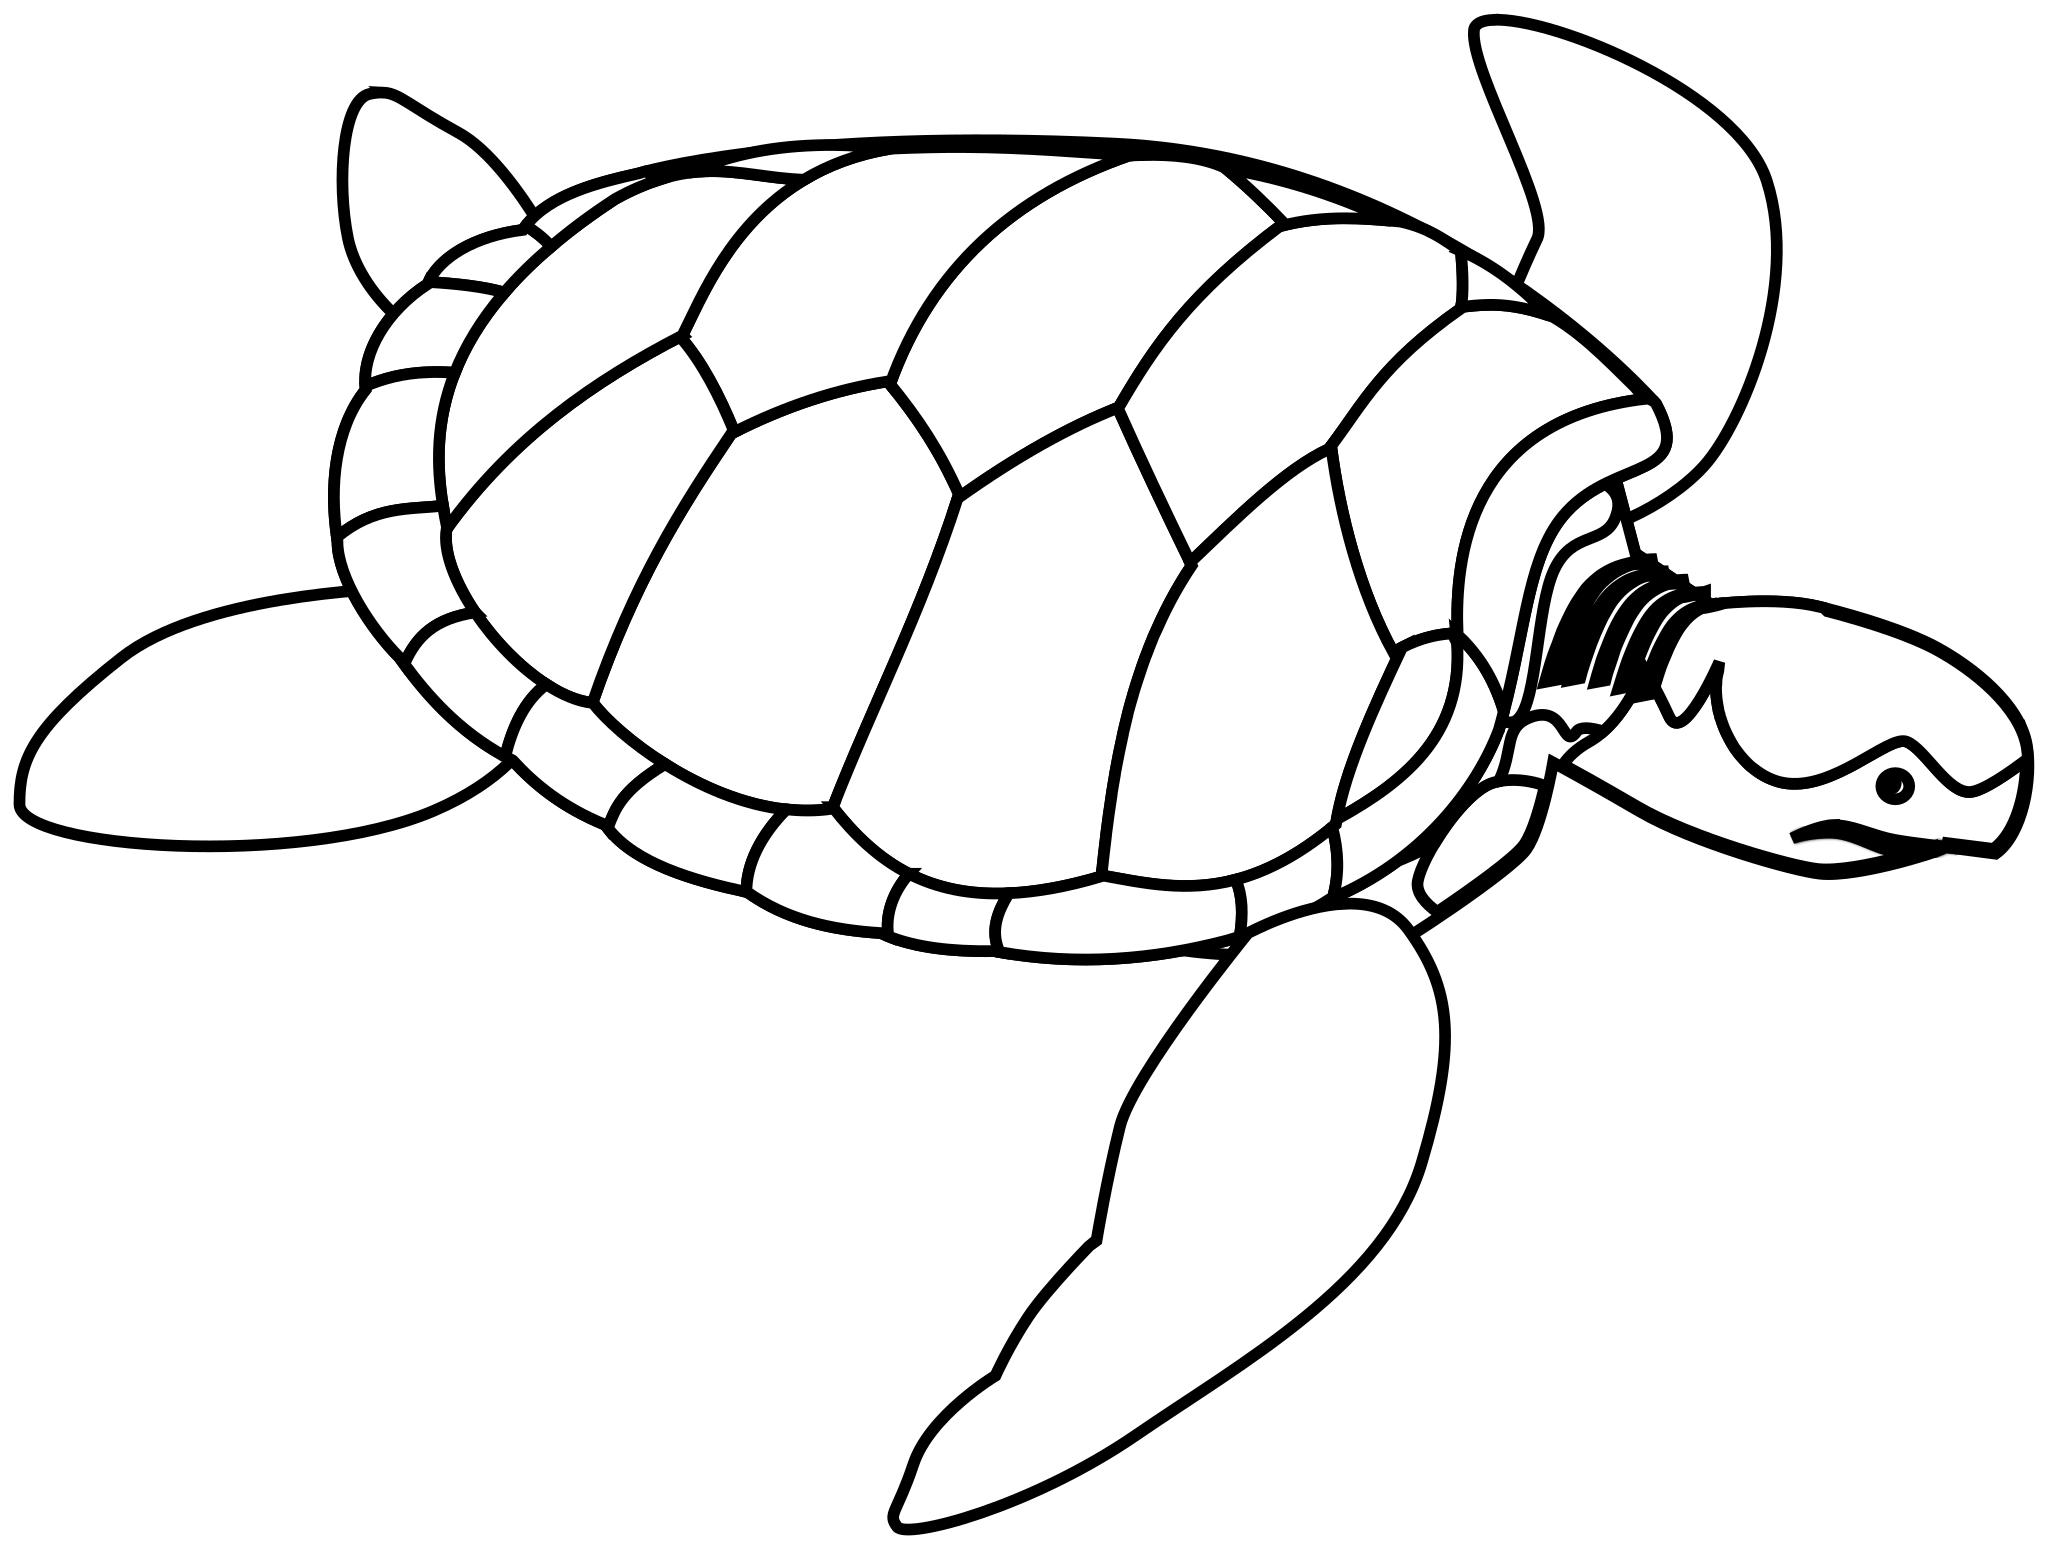 Free Images - green sea turtle lineart.